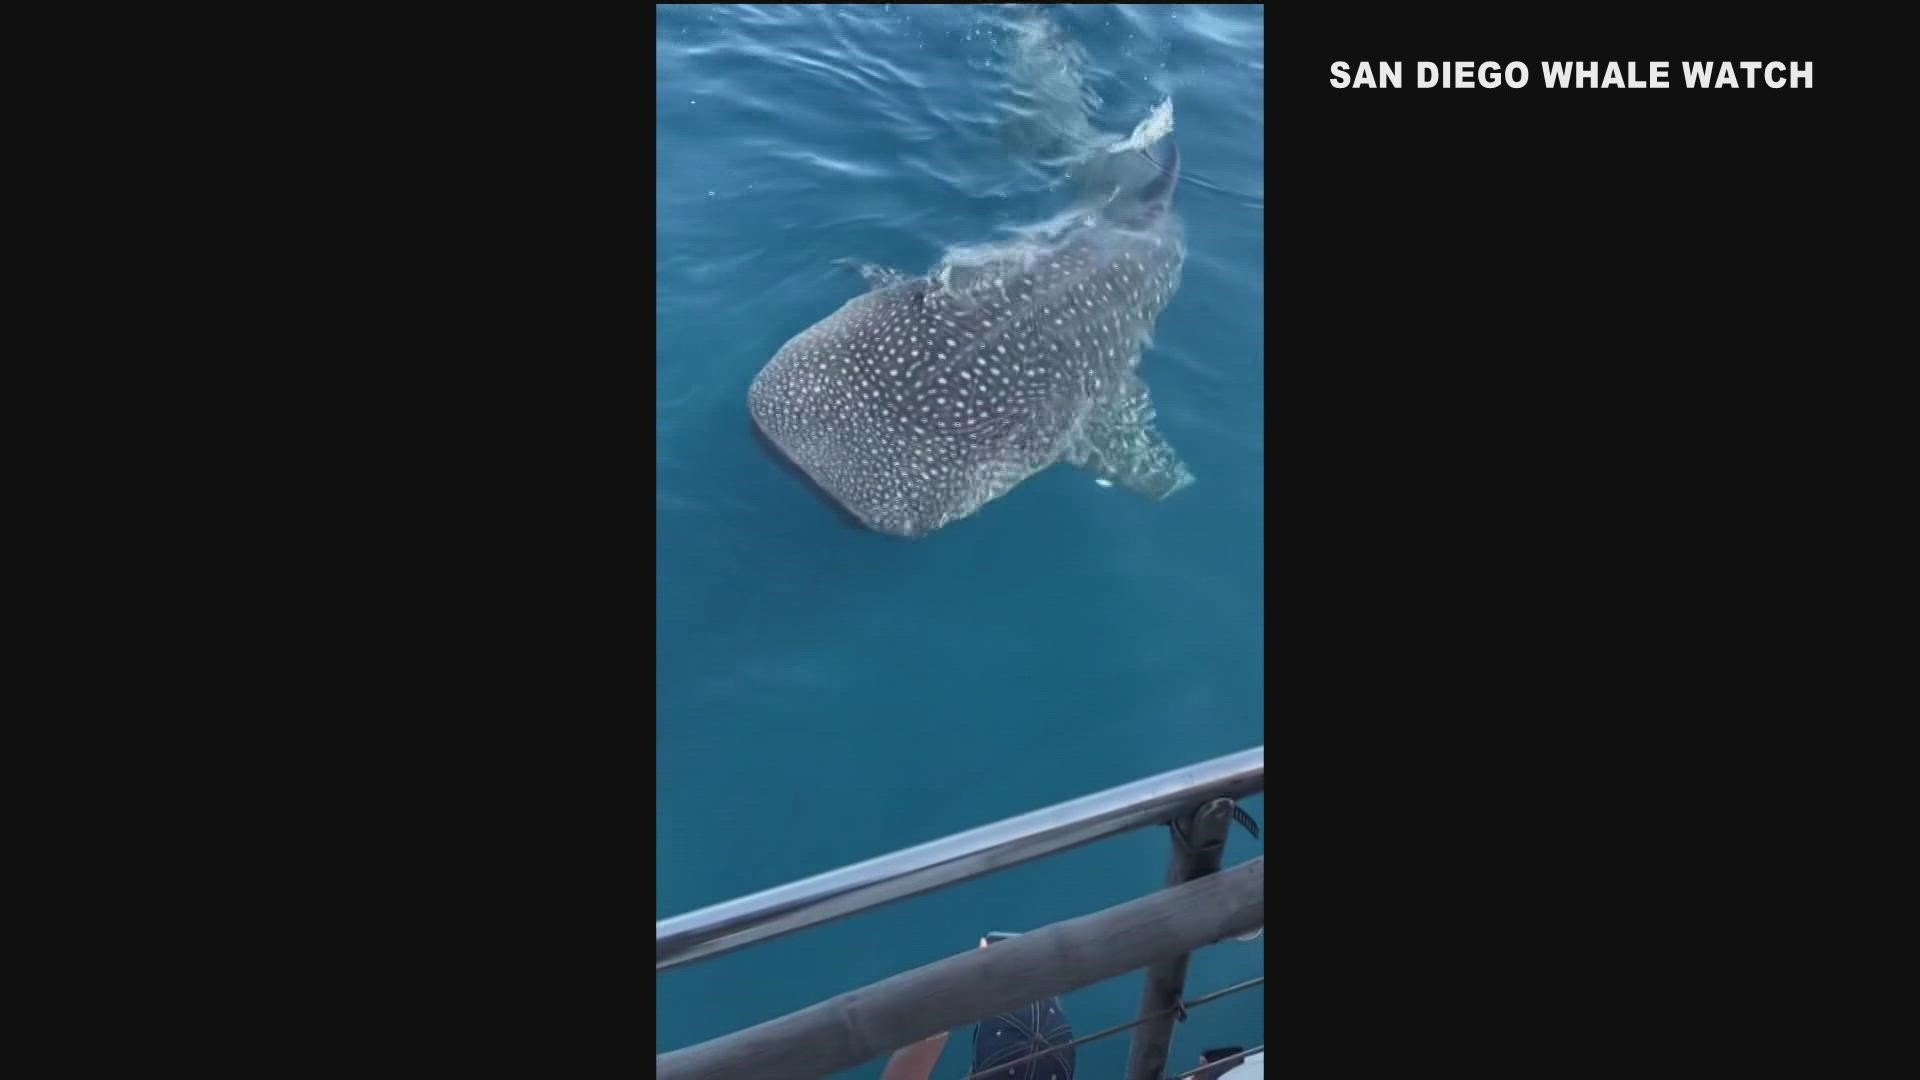 This is a rare sighting of a whale shark approaching the boat of "San Diego Whale Watch" off the shore of Point Loma Monday.